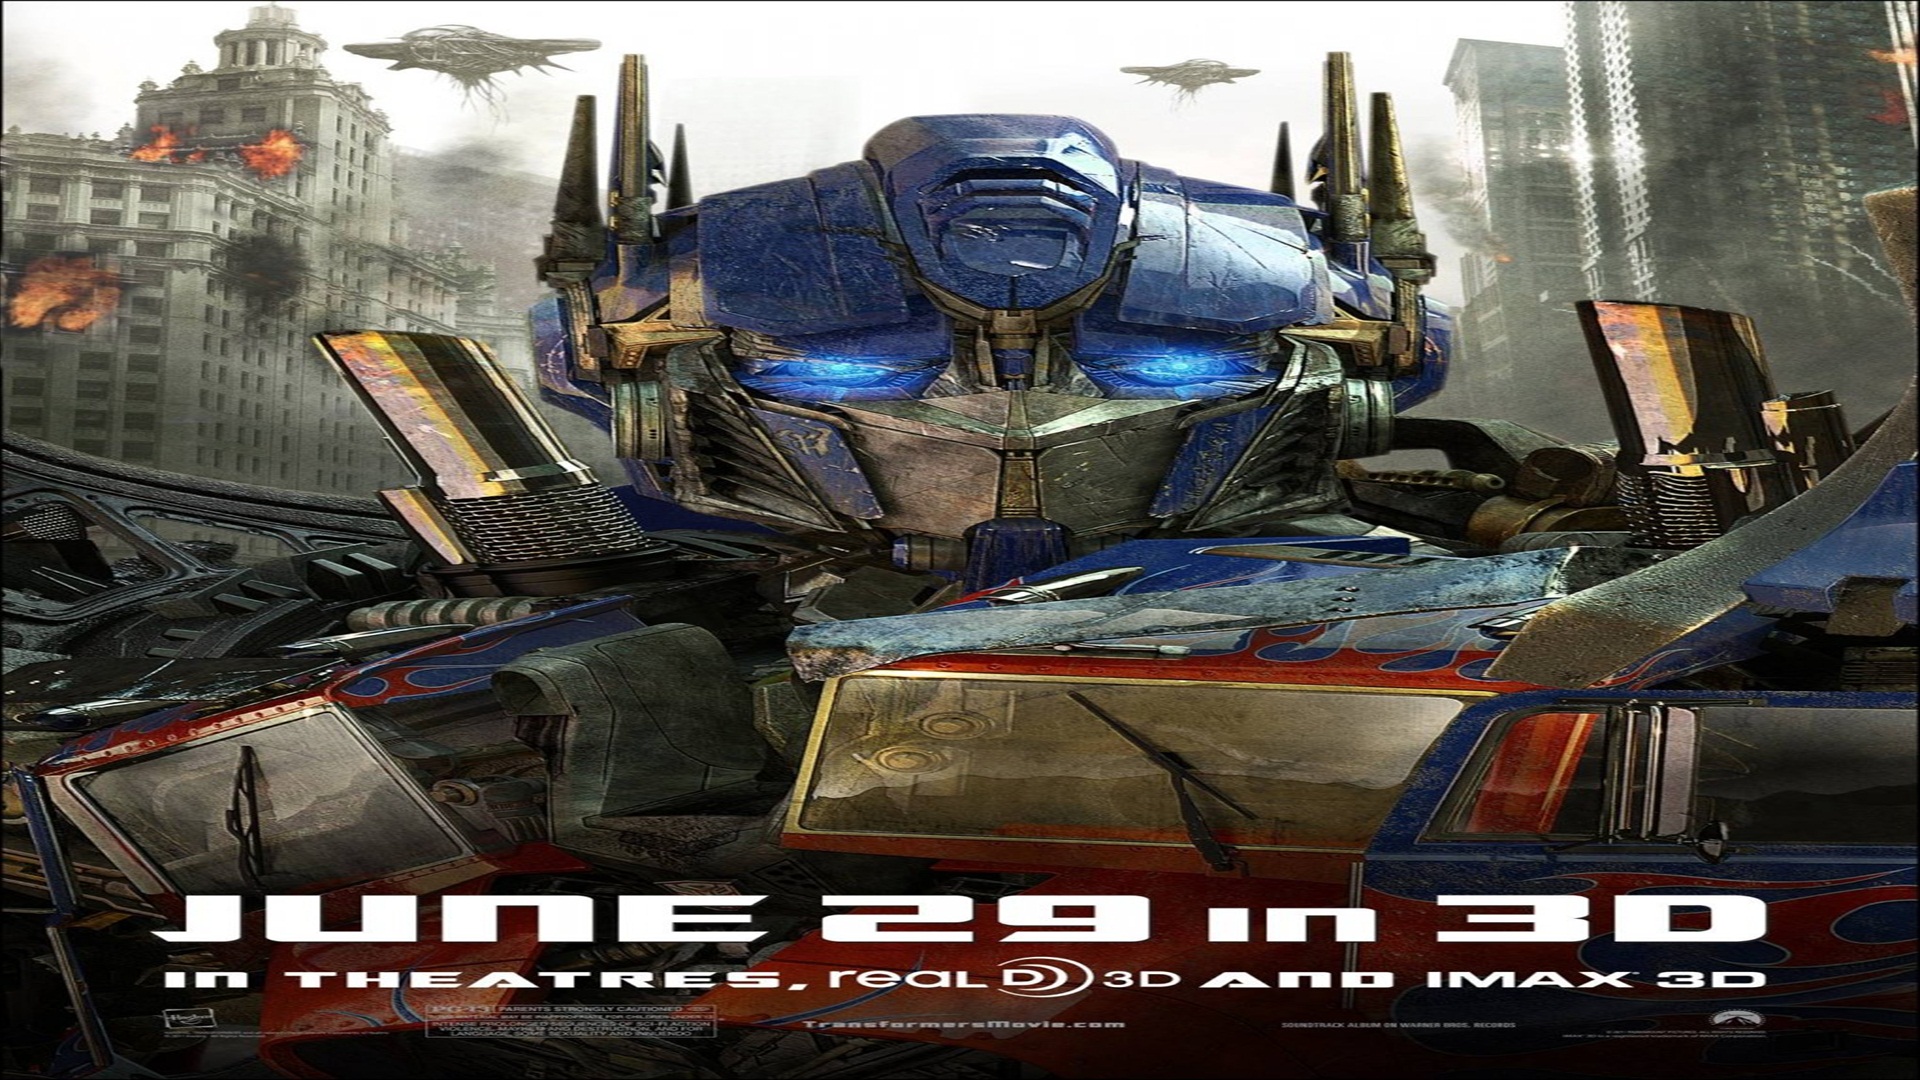 Transformers: Dark of the Moon download the new